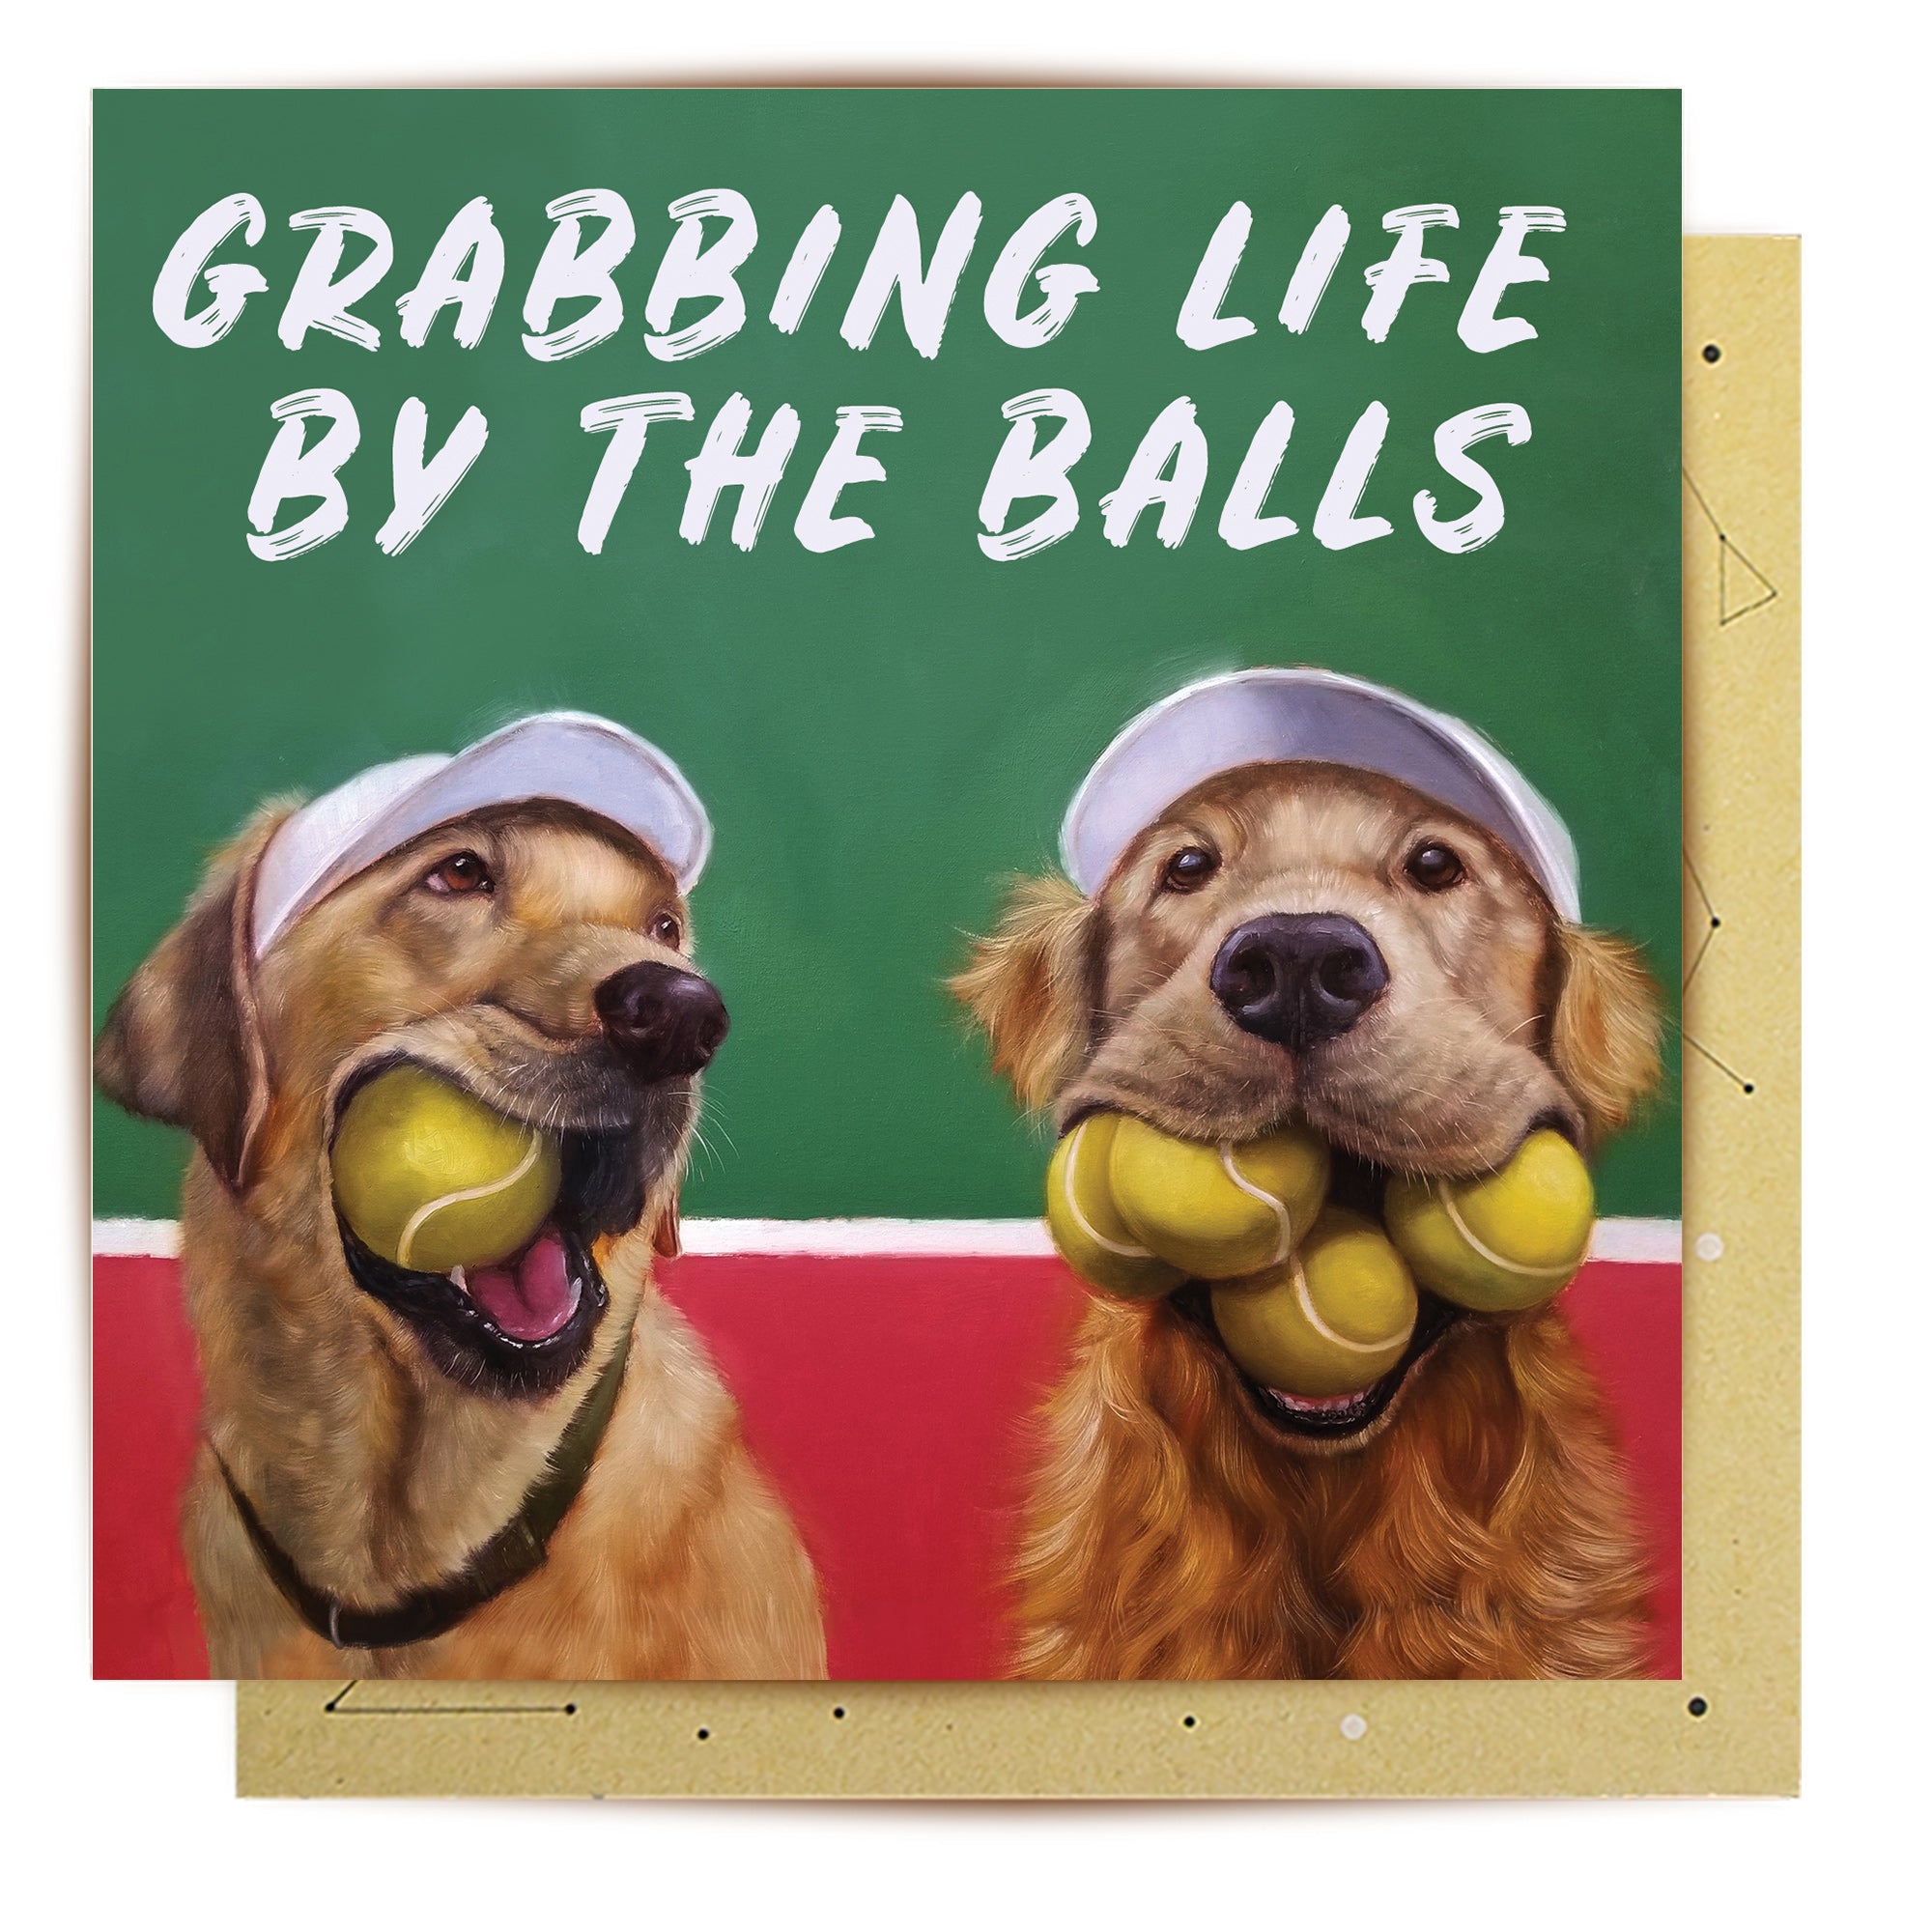 Greeting Card By The Balls